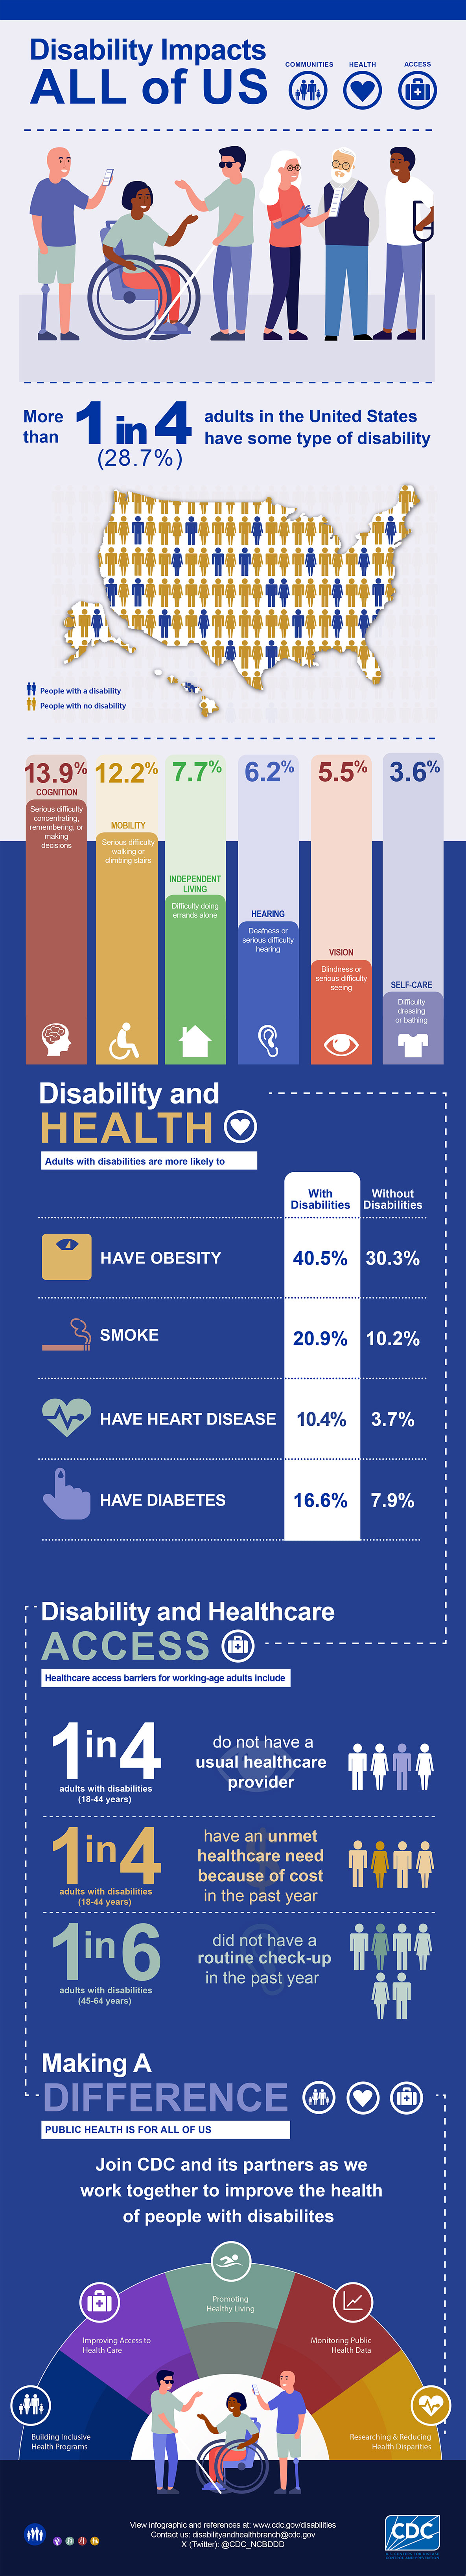 Disability Impacts All of Us Infographic